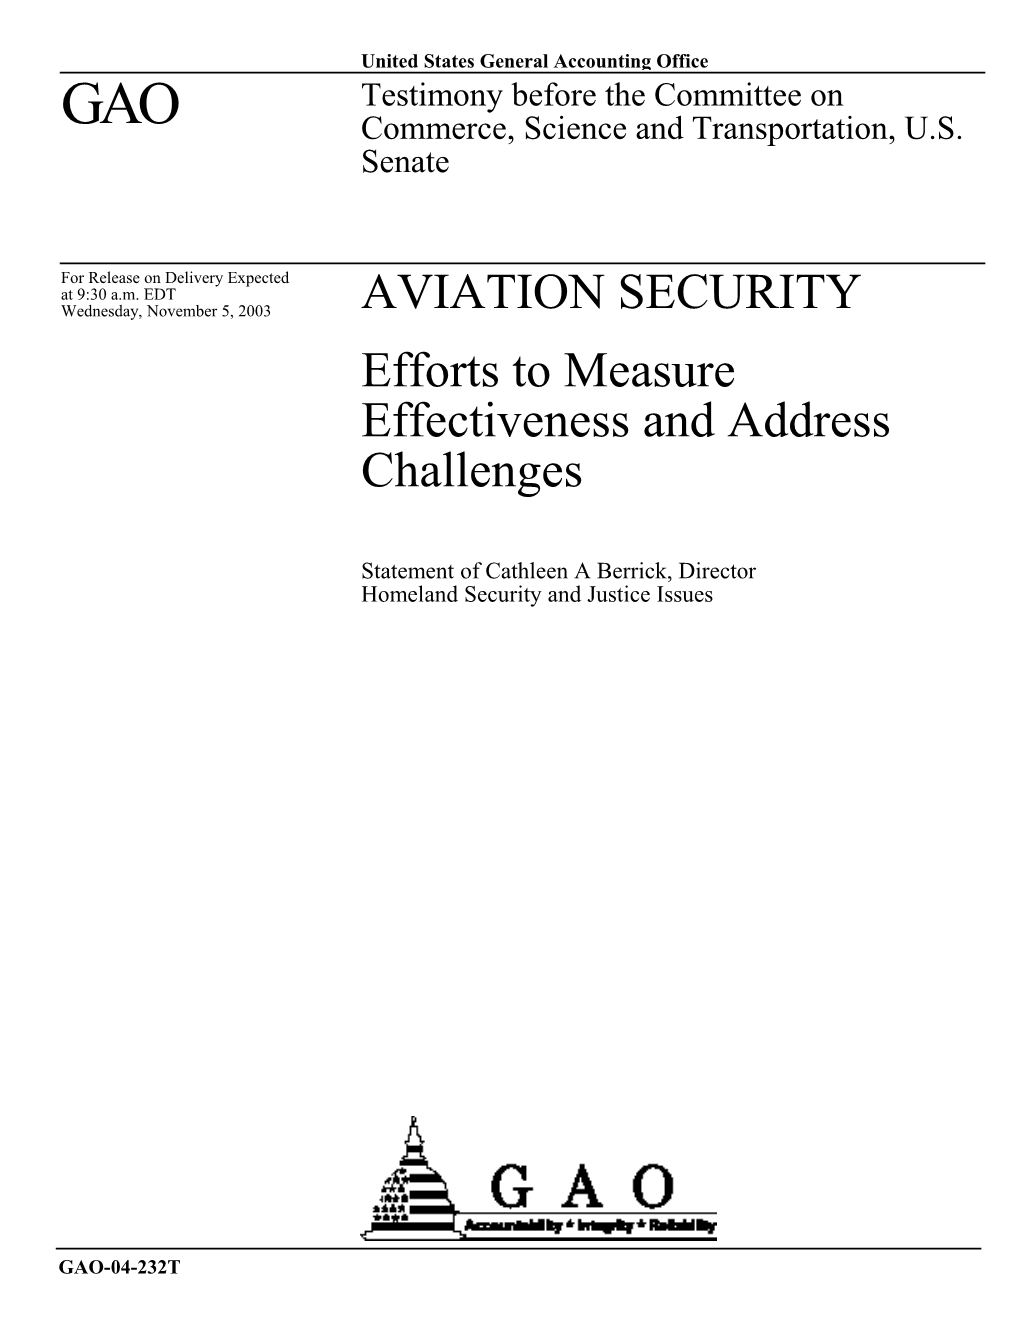 GAO-04-232T, AVIATION SECURITY: Efforts to Measure Effectiveness and Address Challenges